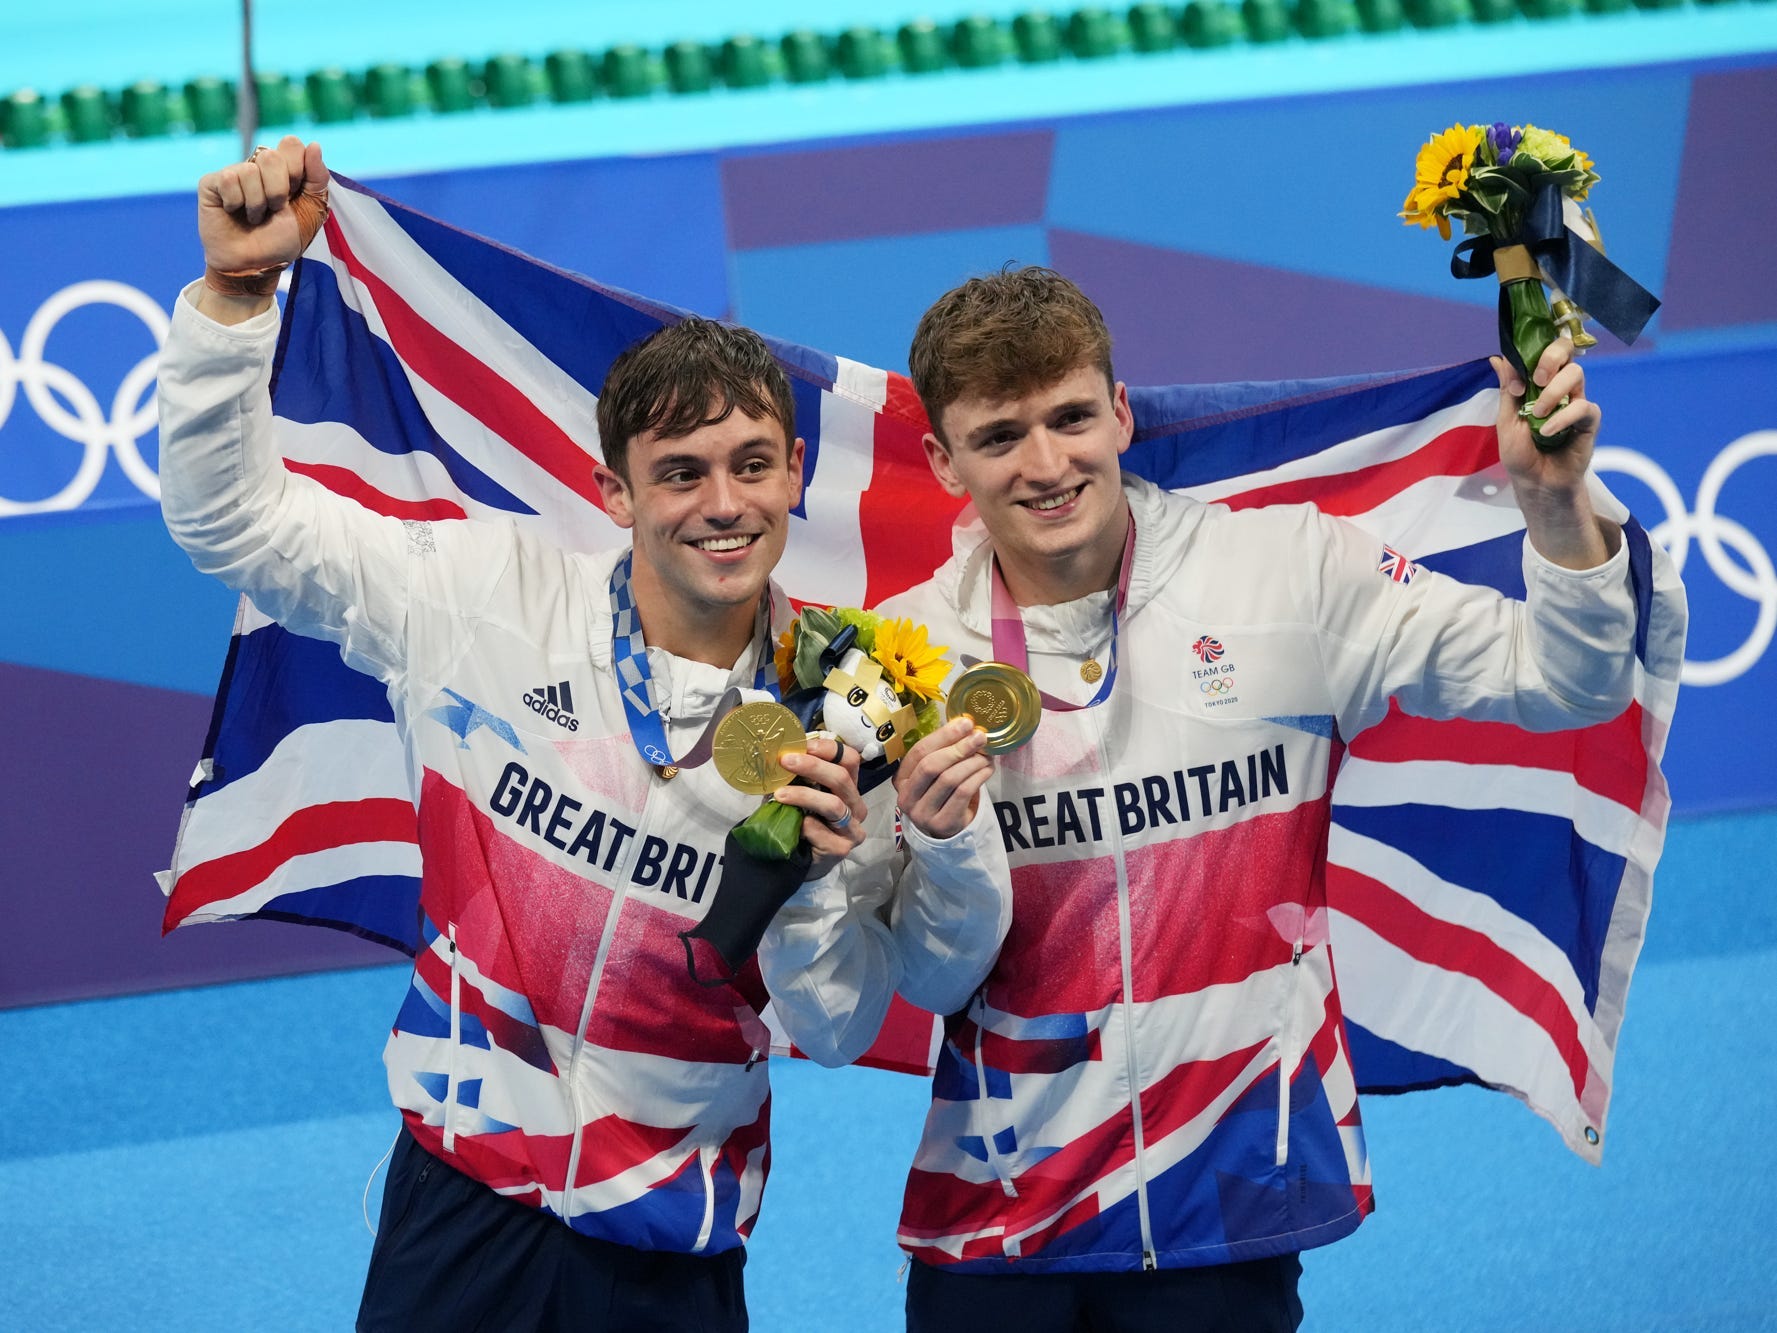 Tom Daley (left) and Matty Lee (right) hold up their gold medals on the podium at the 2020 Tokyo Olympics.